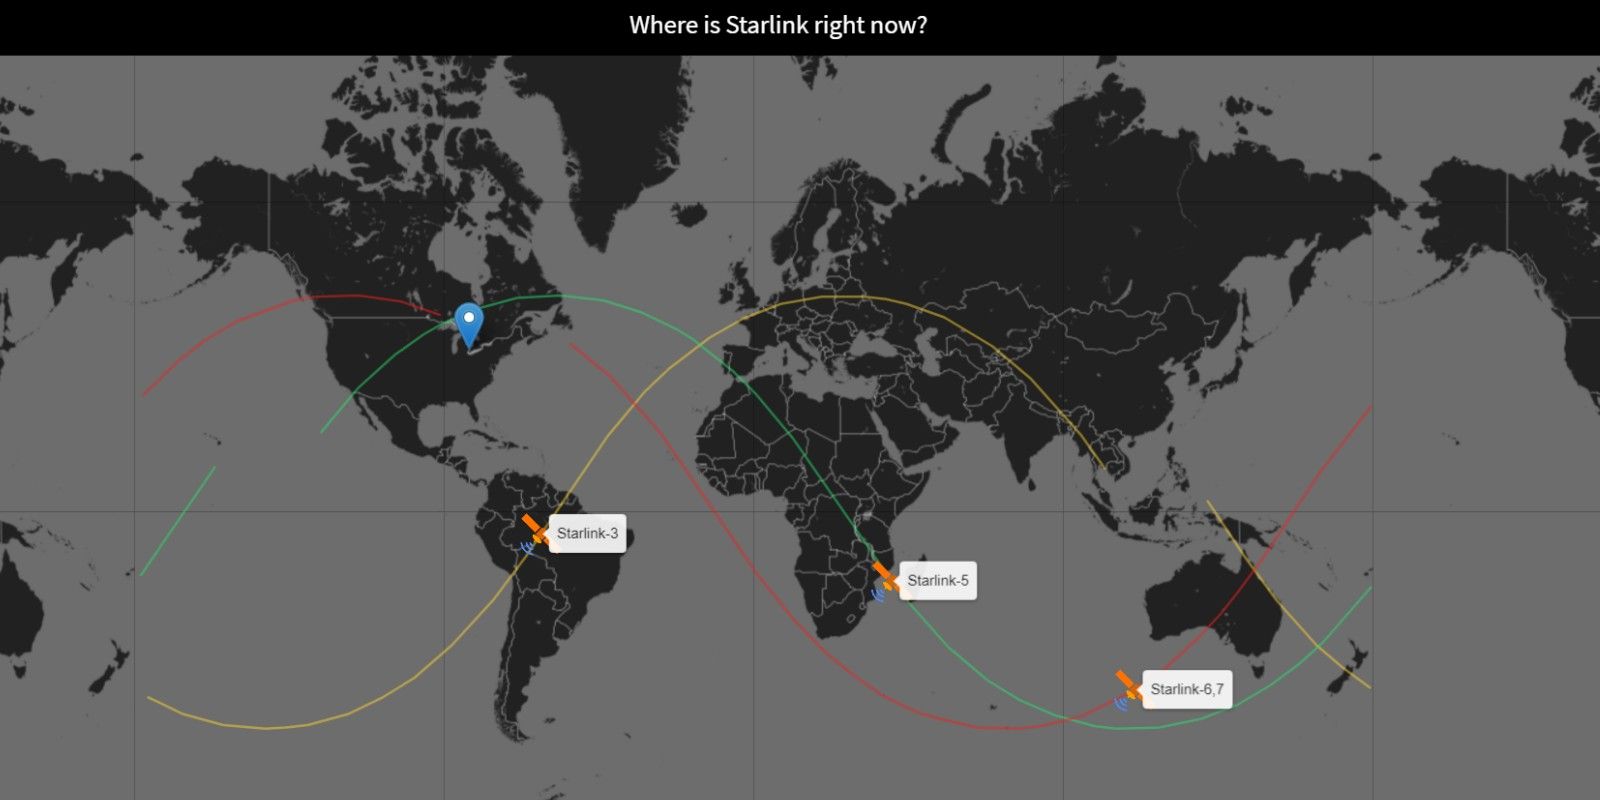 How to Spot Elon Musk's Starlink Satellite in the Sky